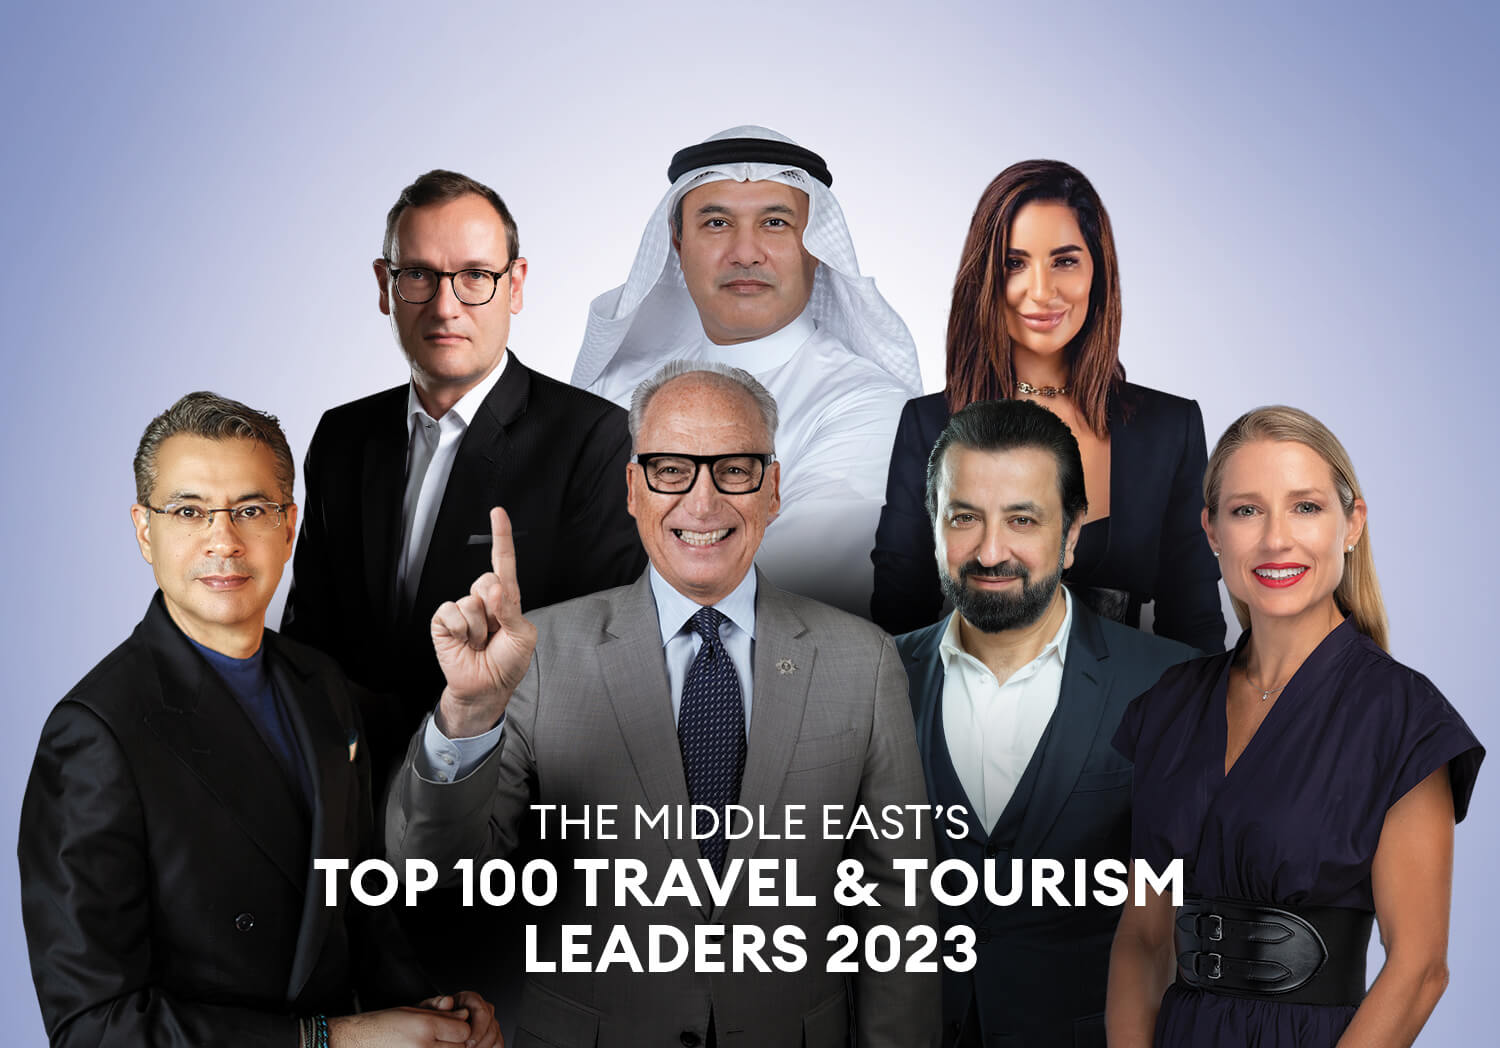 Top 100 Travel & Tourism Leaders 2023